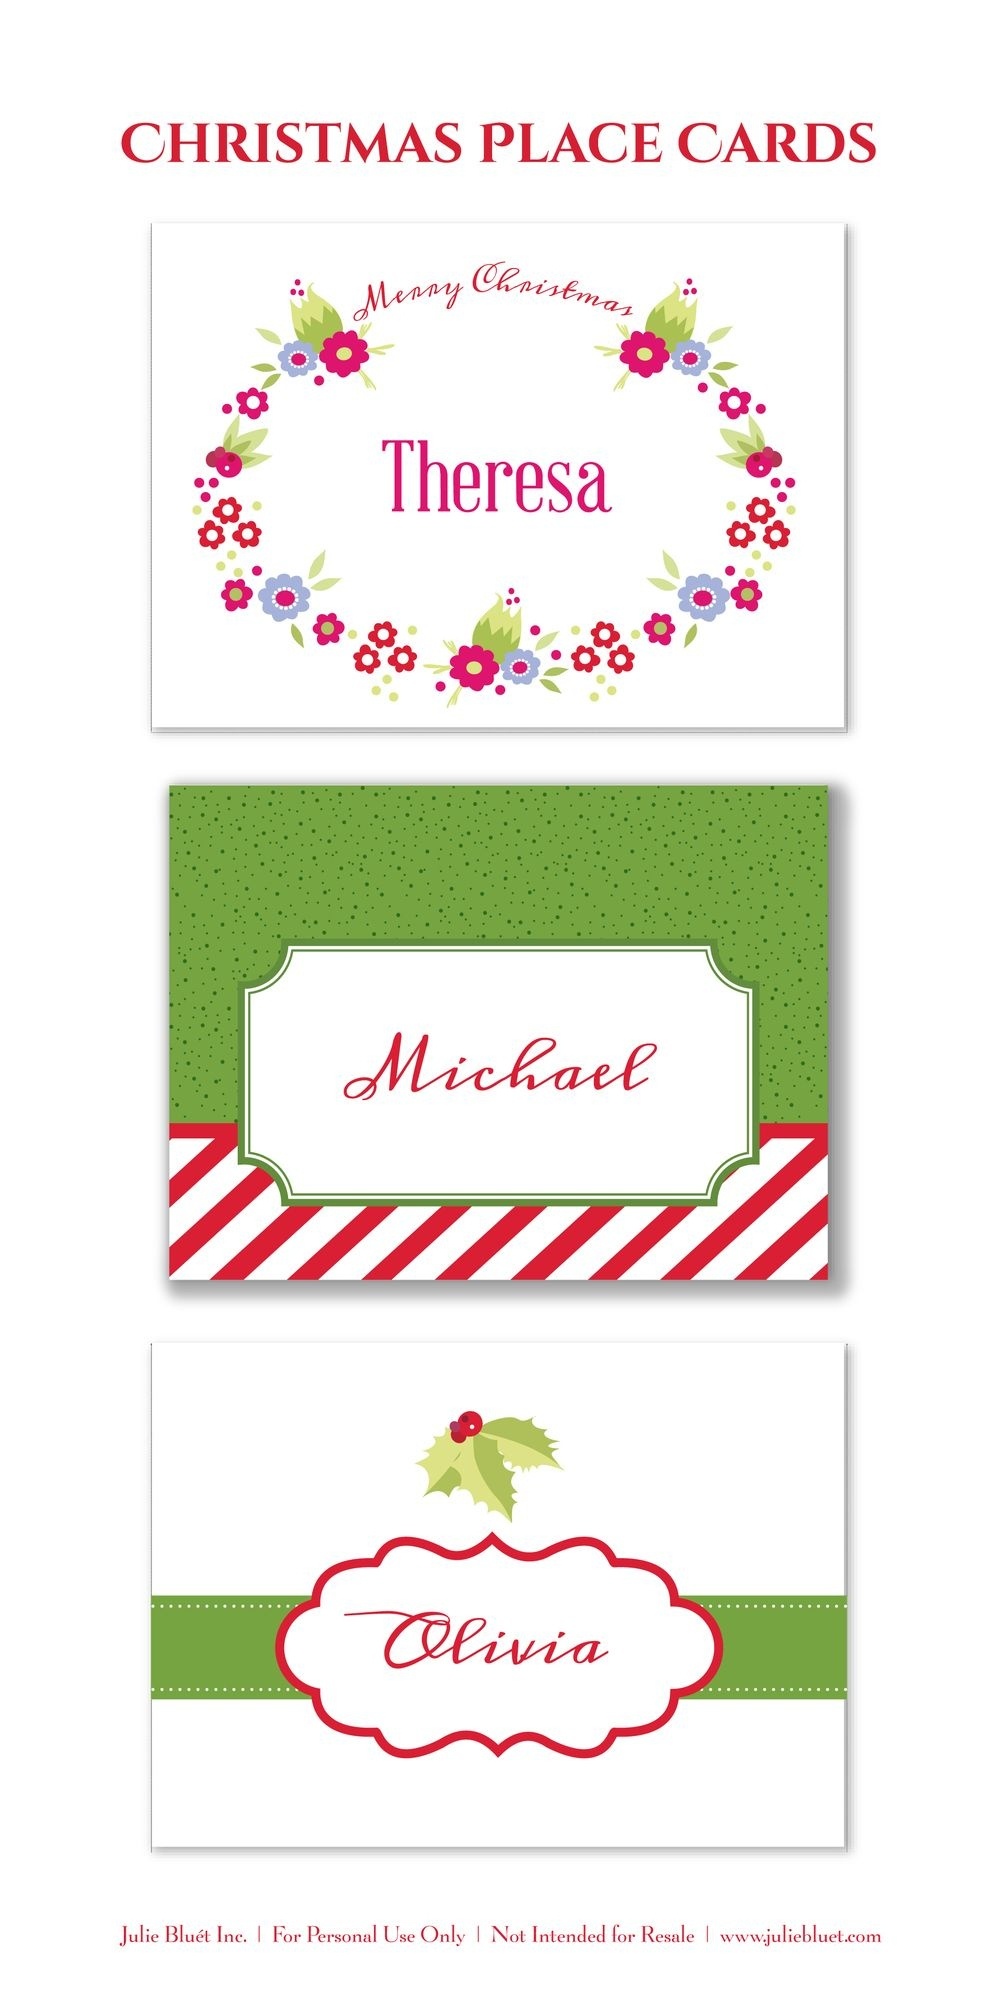 Here Are Three Free Printable Christmas Place Cards For Your Holiday - Free Printable Place Cards